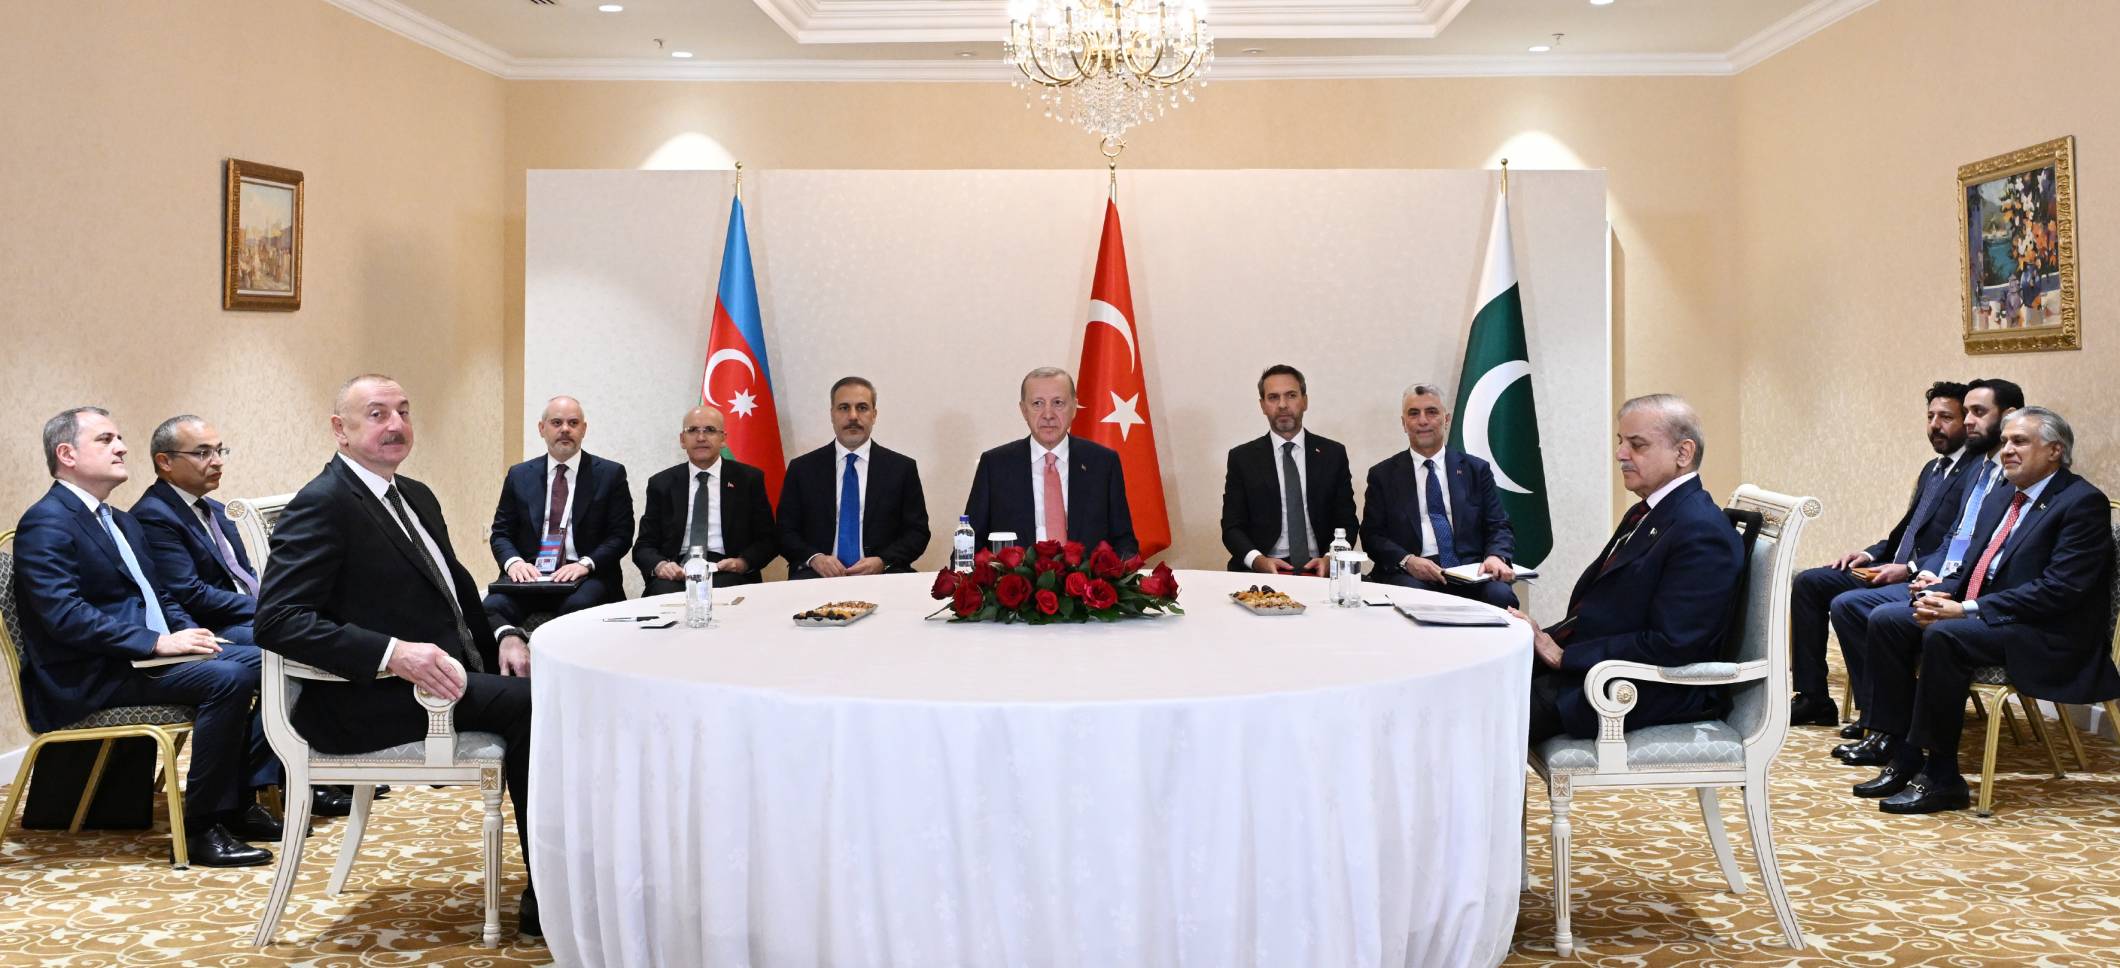 Trilateral meeting between President of Azerbaijan, President of Turkiye and Prime Minister of Pakistan was held in Astana